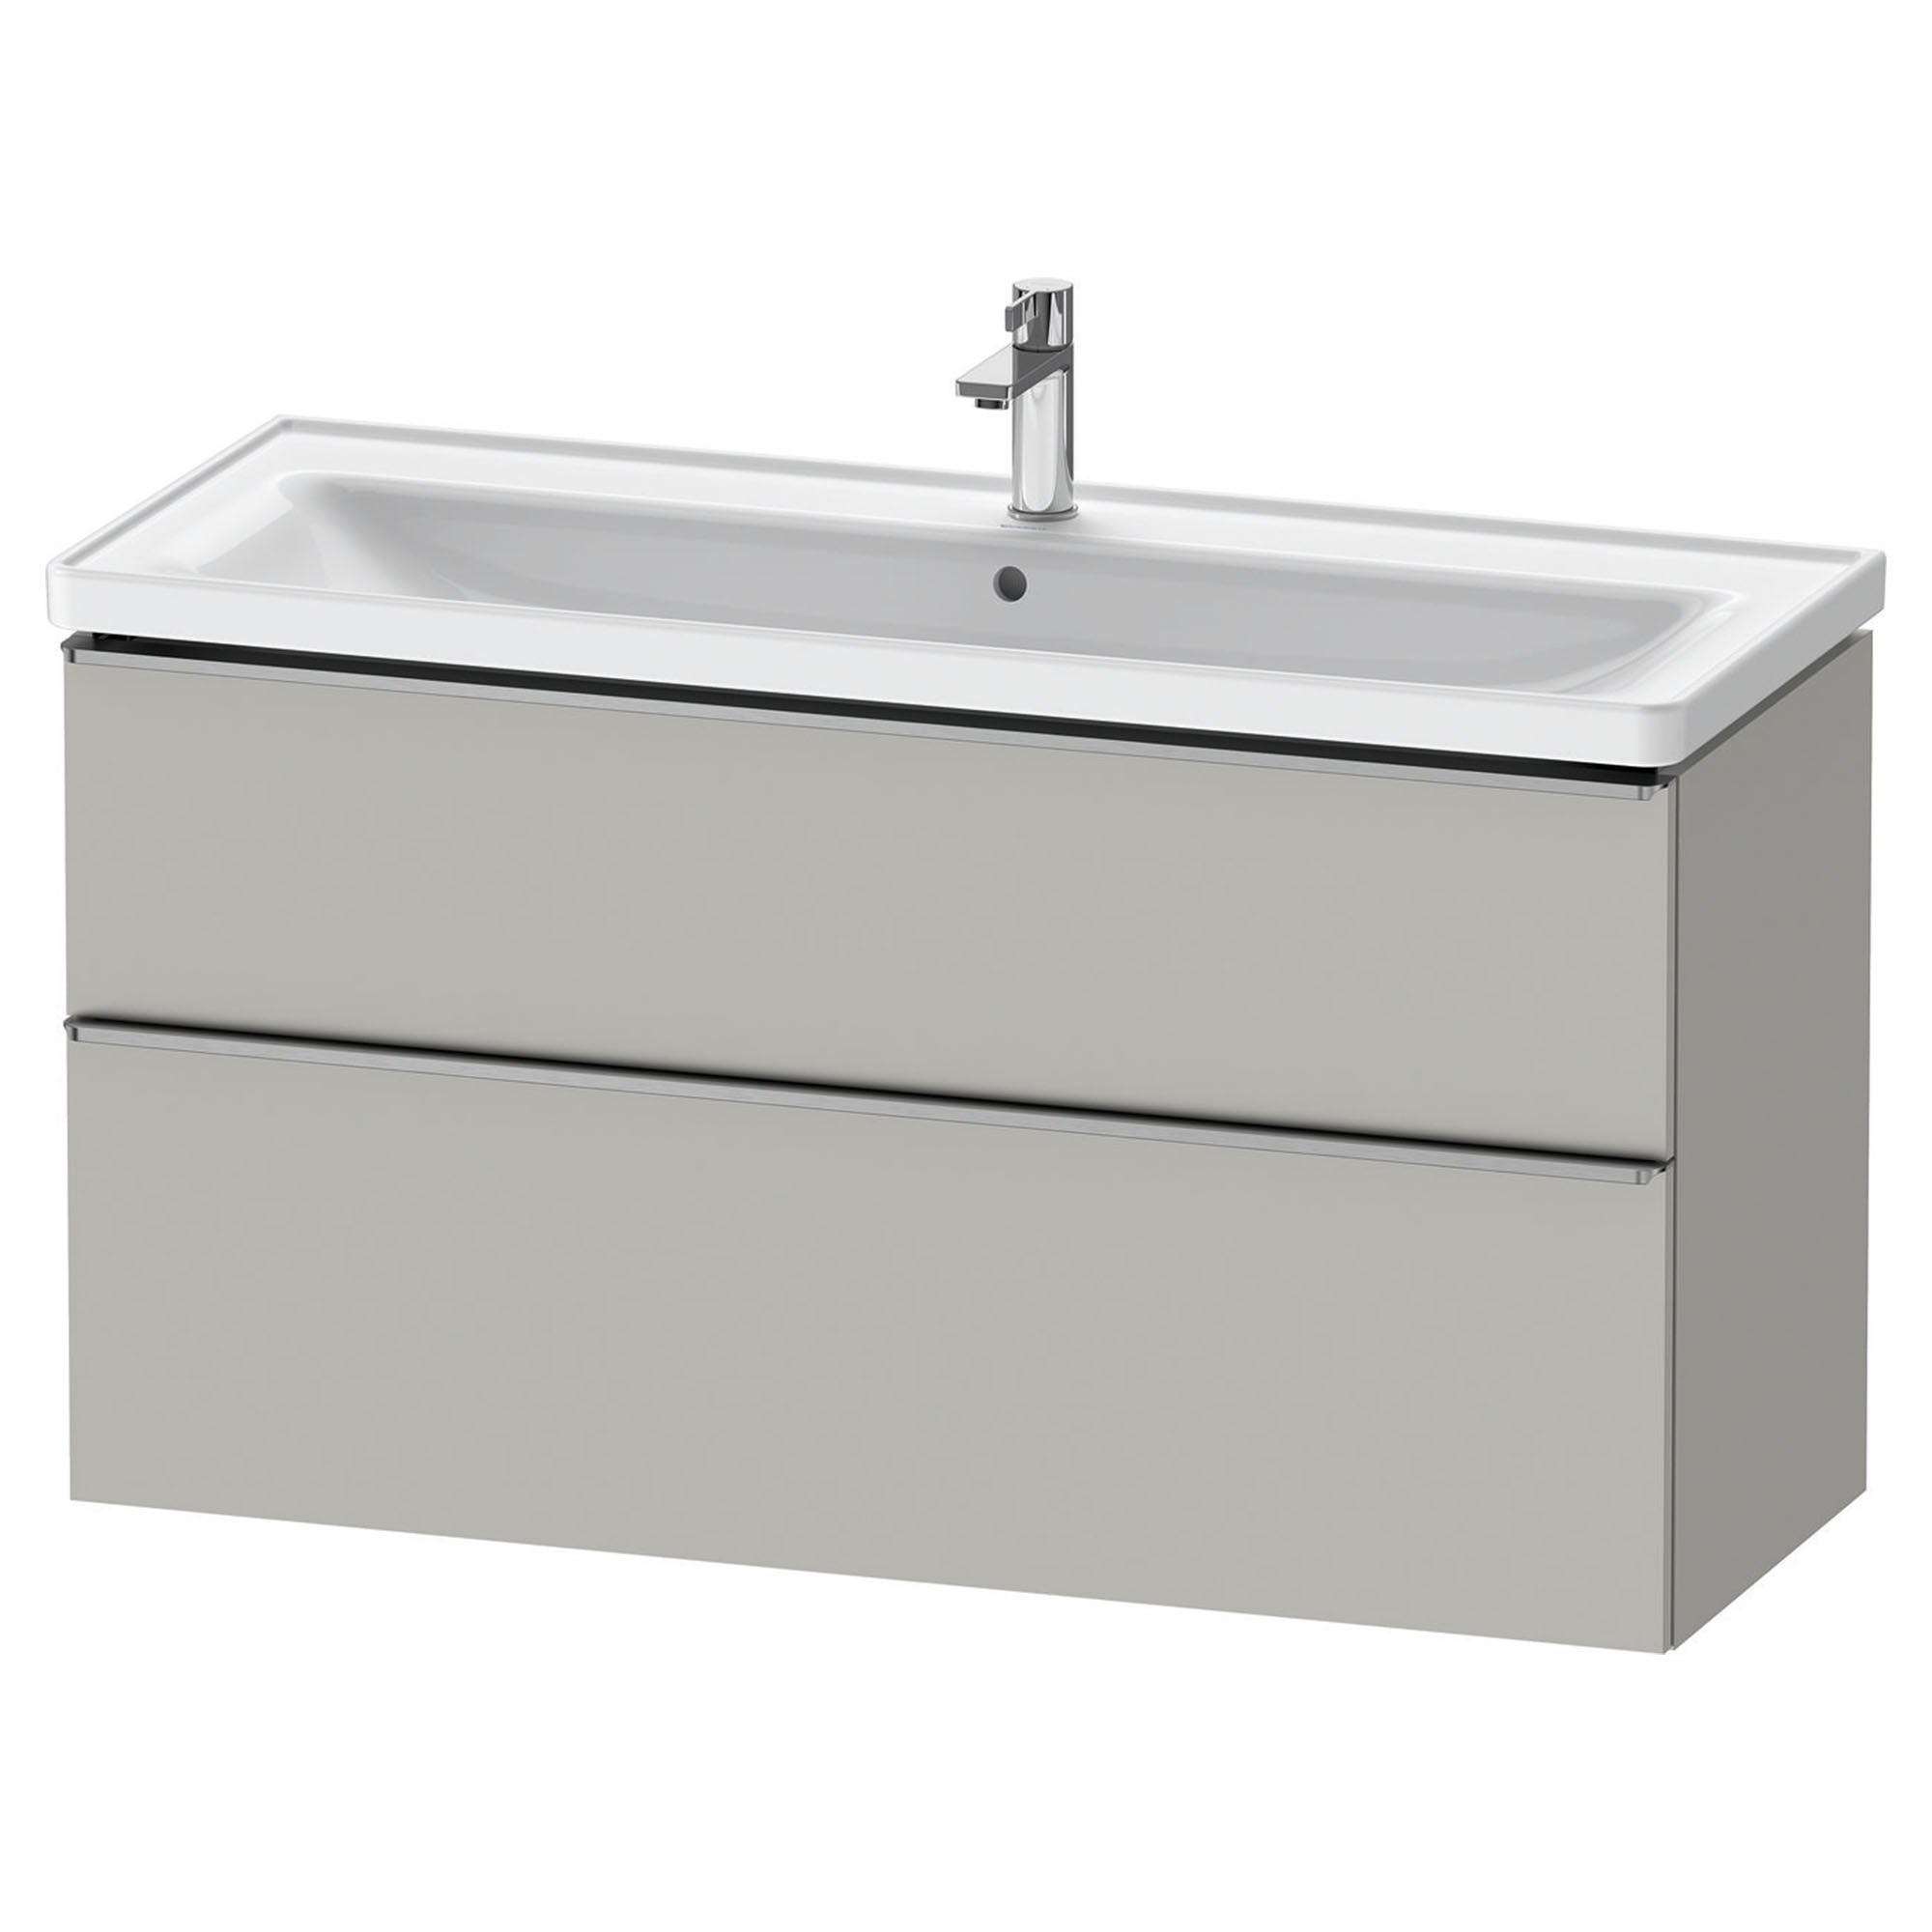 duravit d-neo 1200mm wall mounted vanity unit with d-neo basin concrete grey stainless steel handles